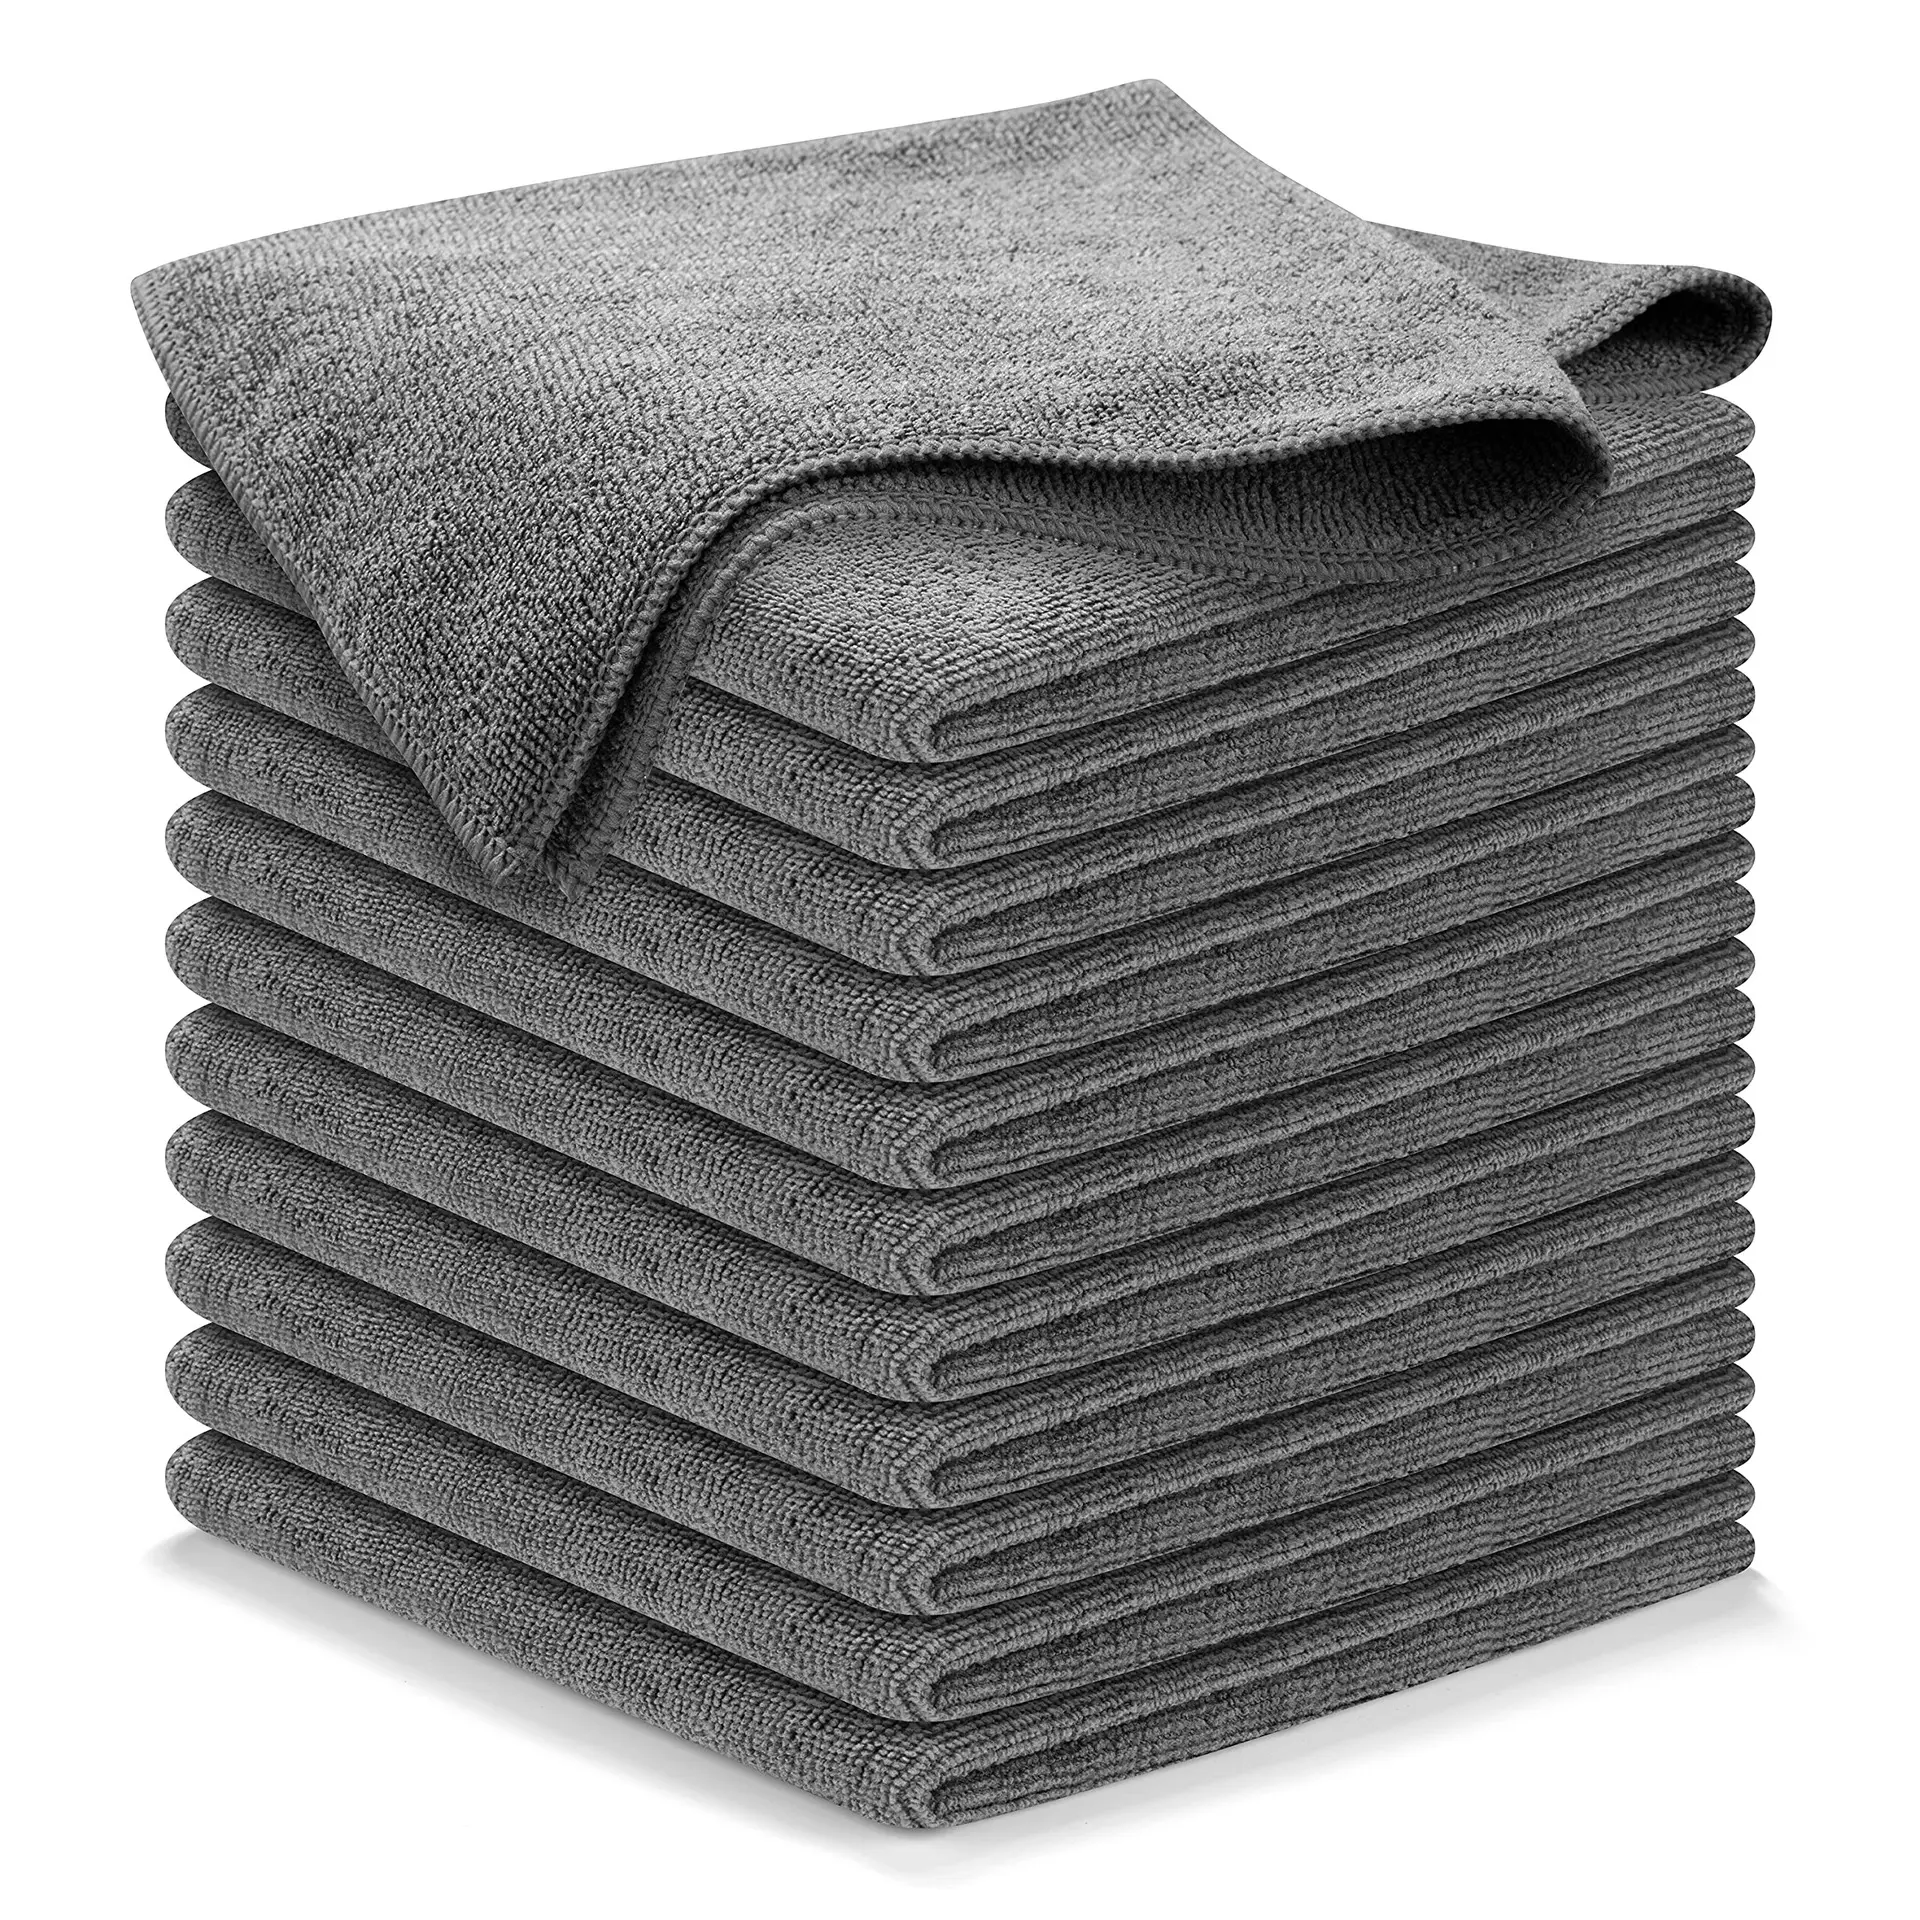 Microfiber Cleaning Cloth Grey 30*30cm 1200 Washes Ultra Absorbent Streak-Free Mirror Shine Car Washing Towels